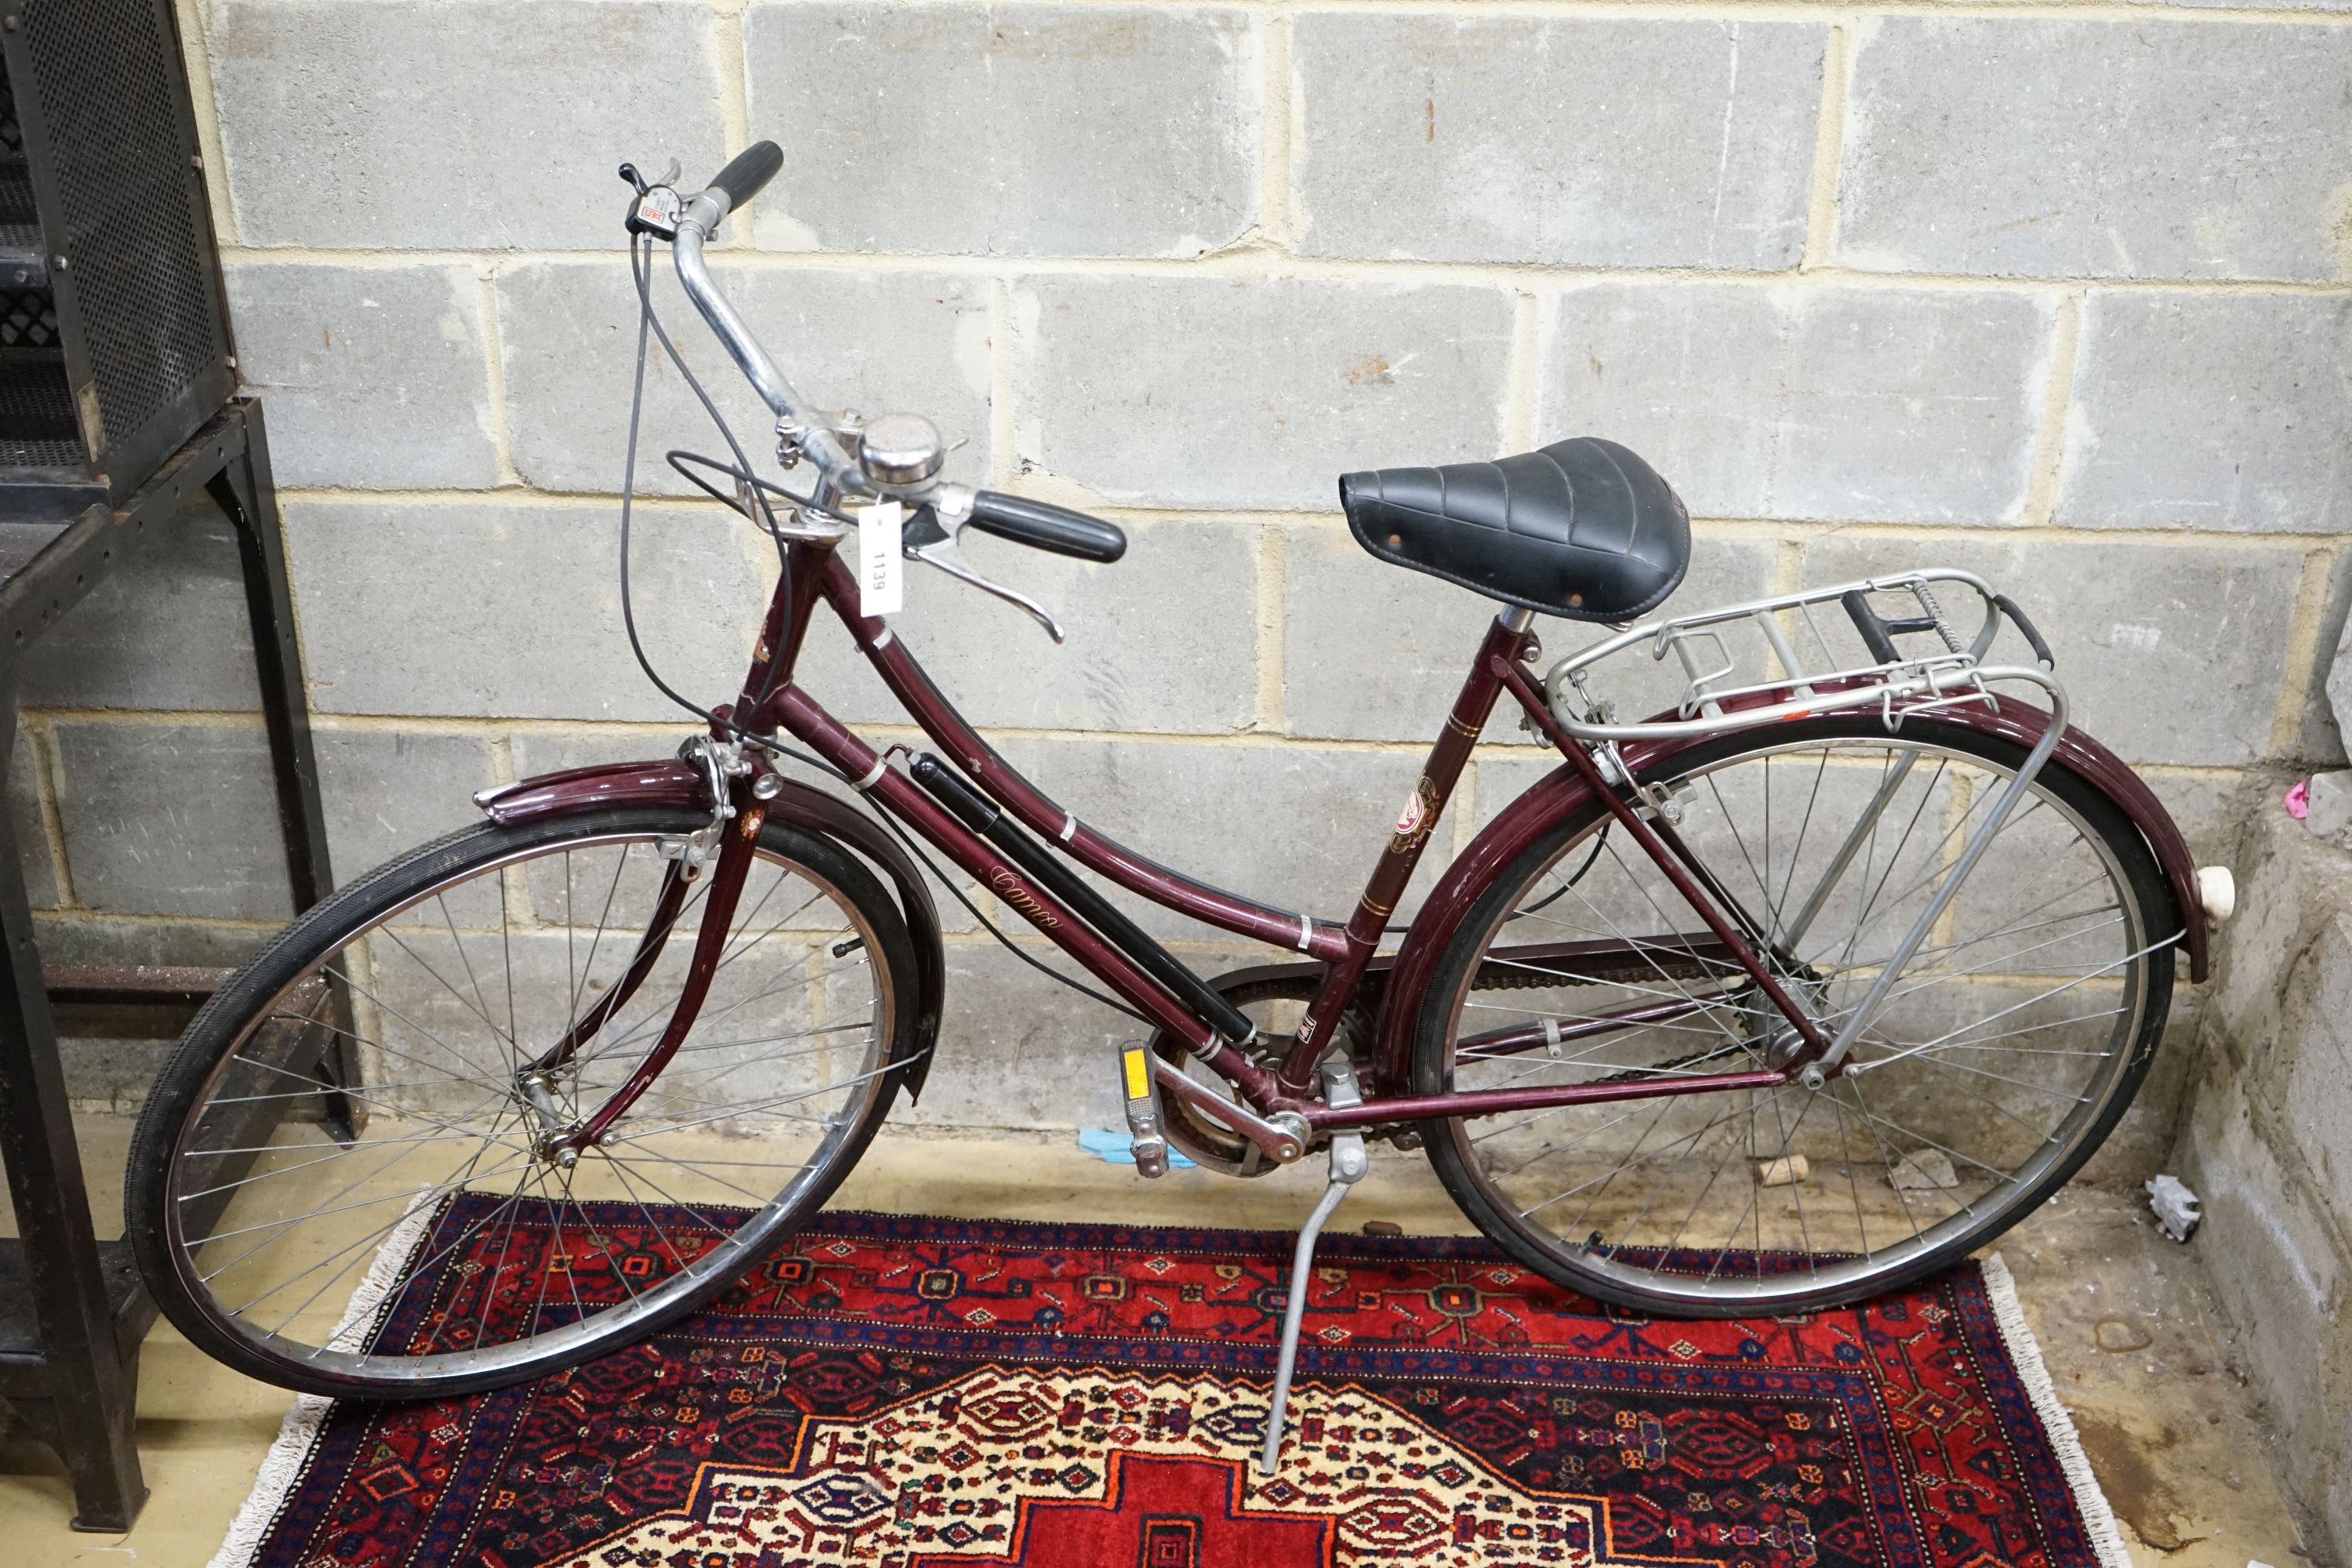 A Raleigh Cameo lady's bicycle